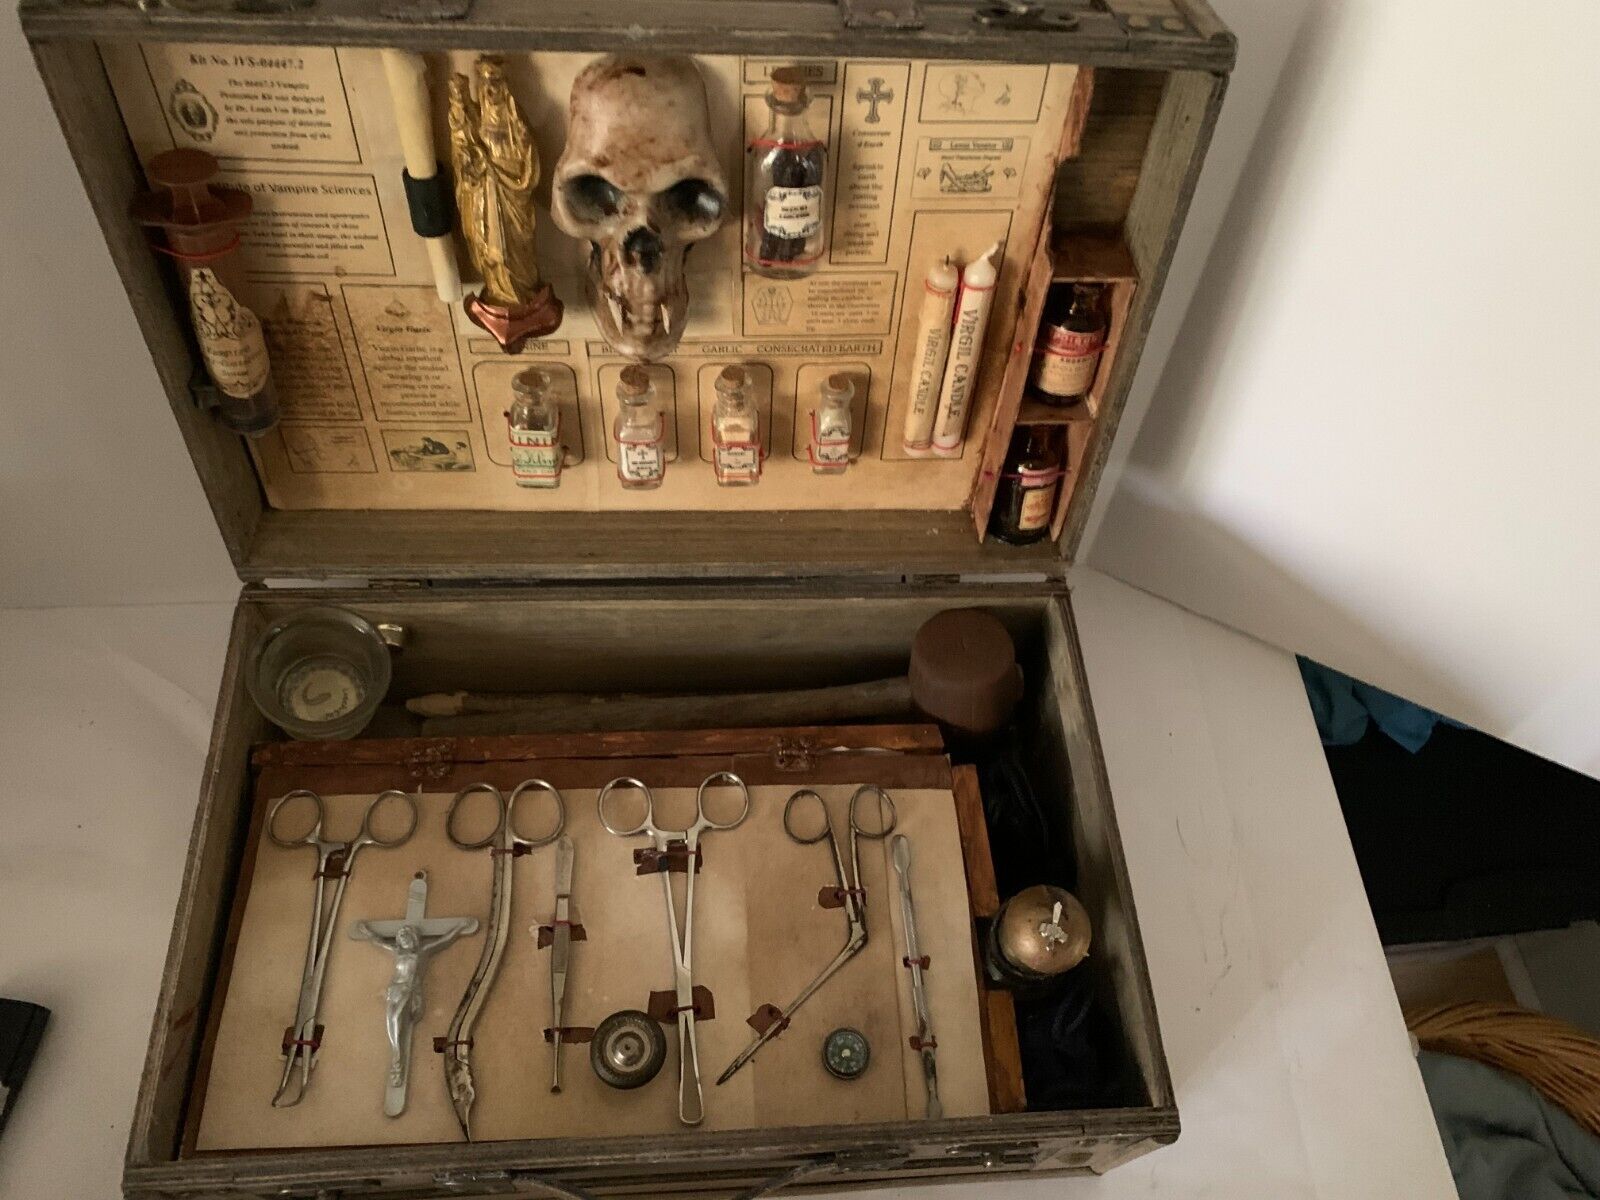 2Dr. Louis VonBlack's Awesome Vampire Slayer / Hunter Kit - Over 30 pcs. in all